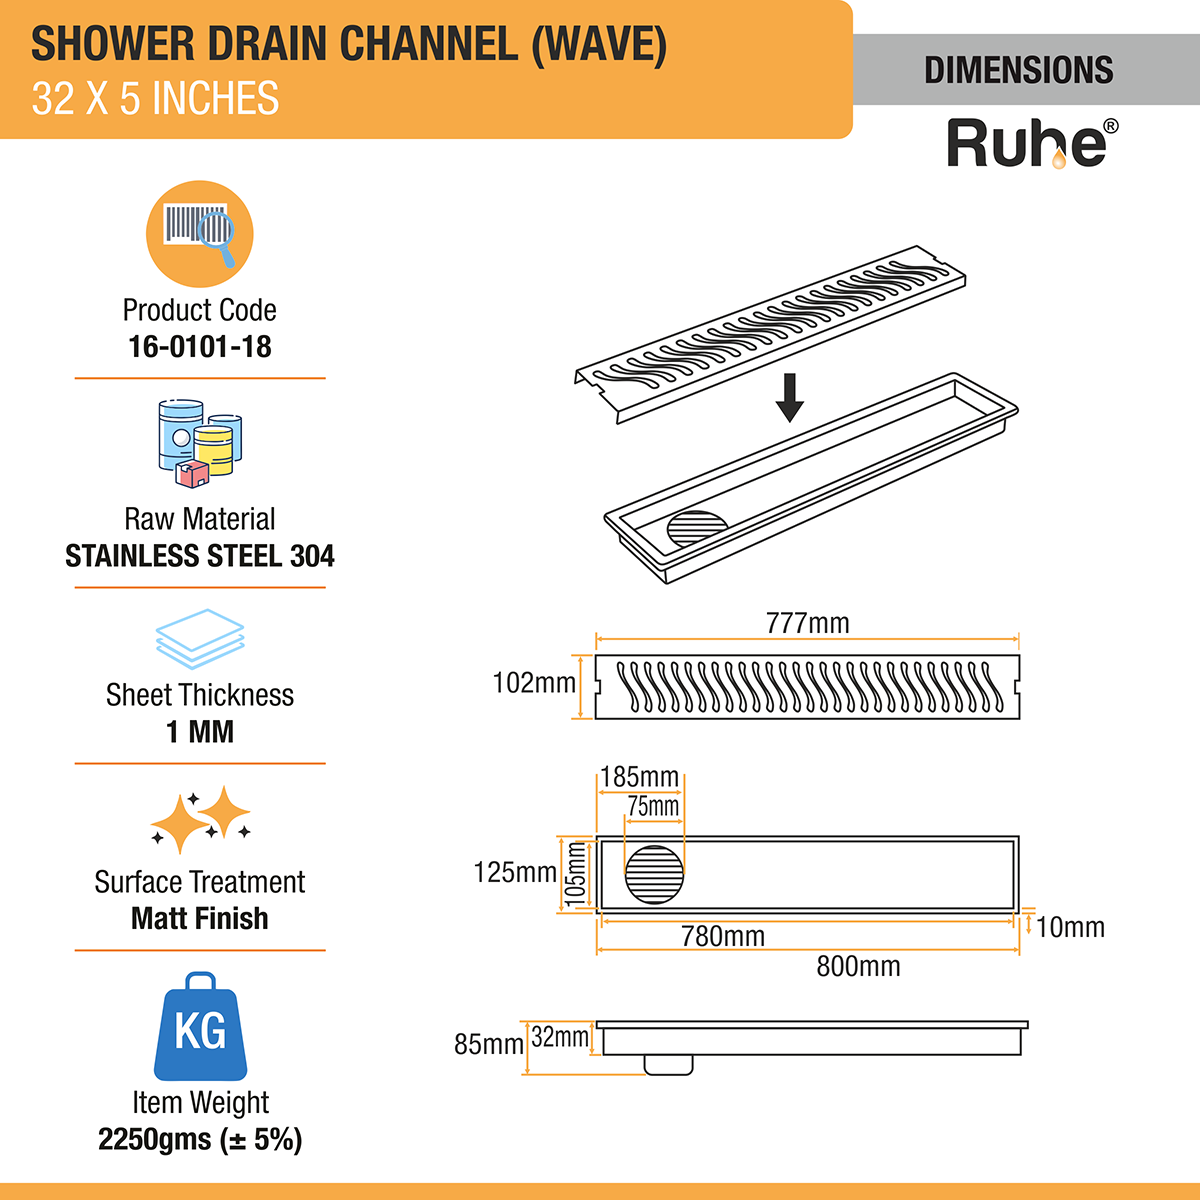 Wave Shower Drain Channel (32 X 5 Inches) with Cockroach Trap (304 Grade) dimensions and size